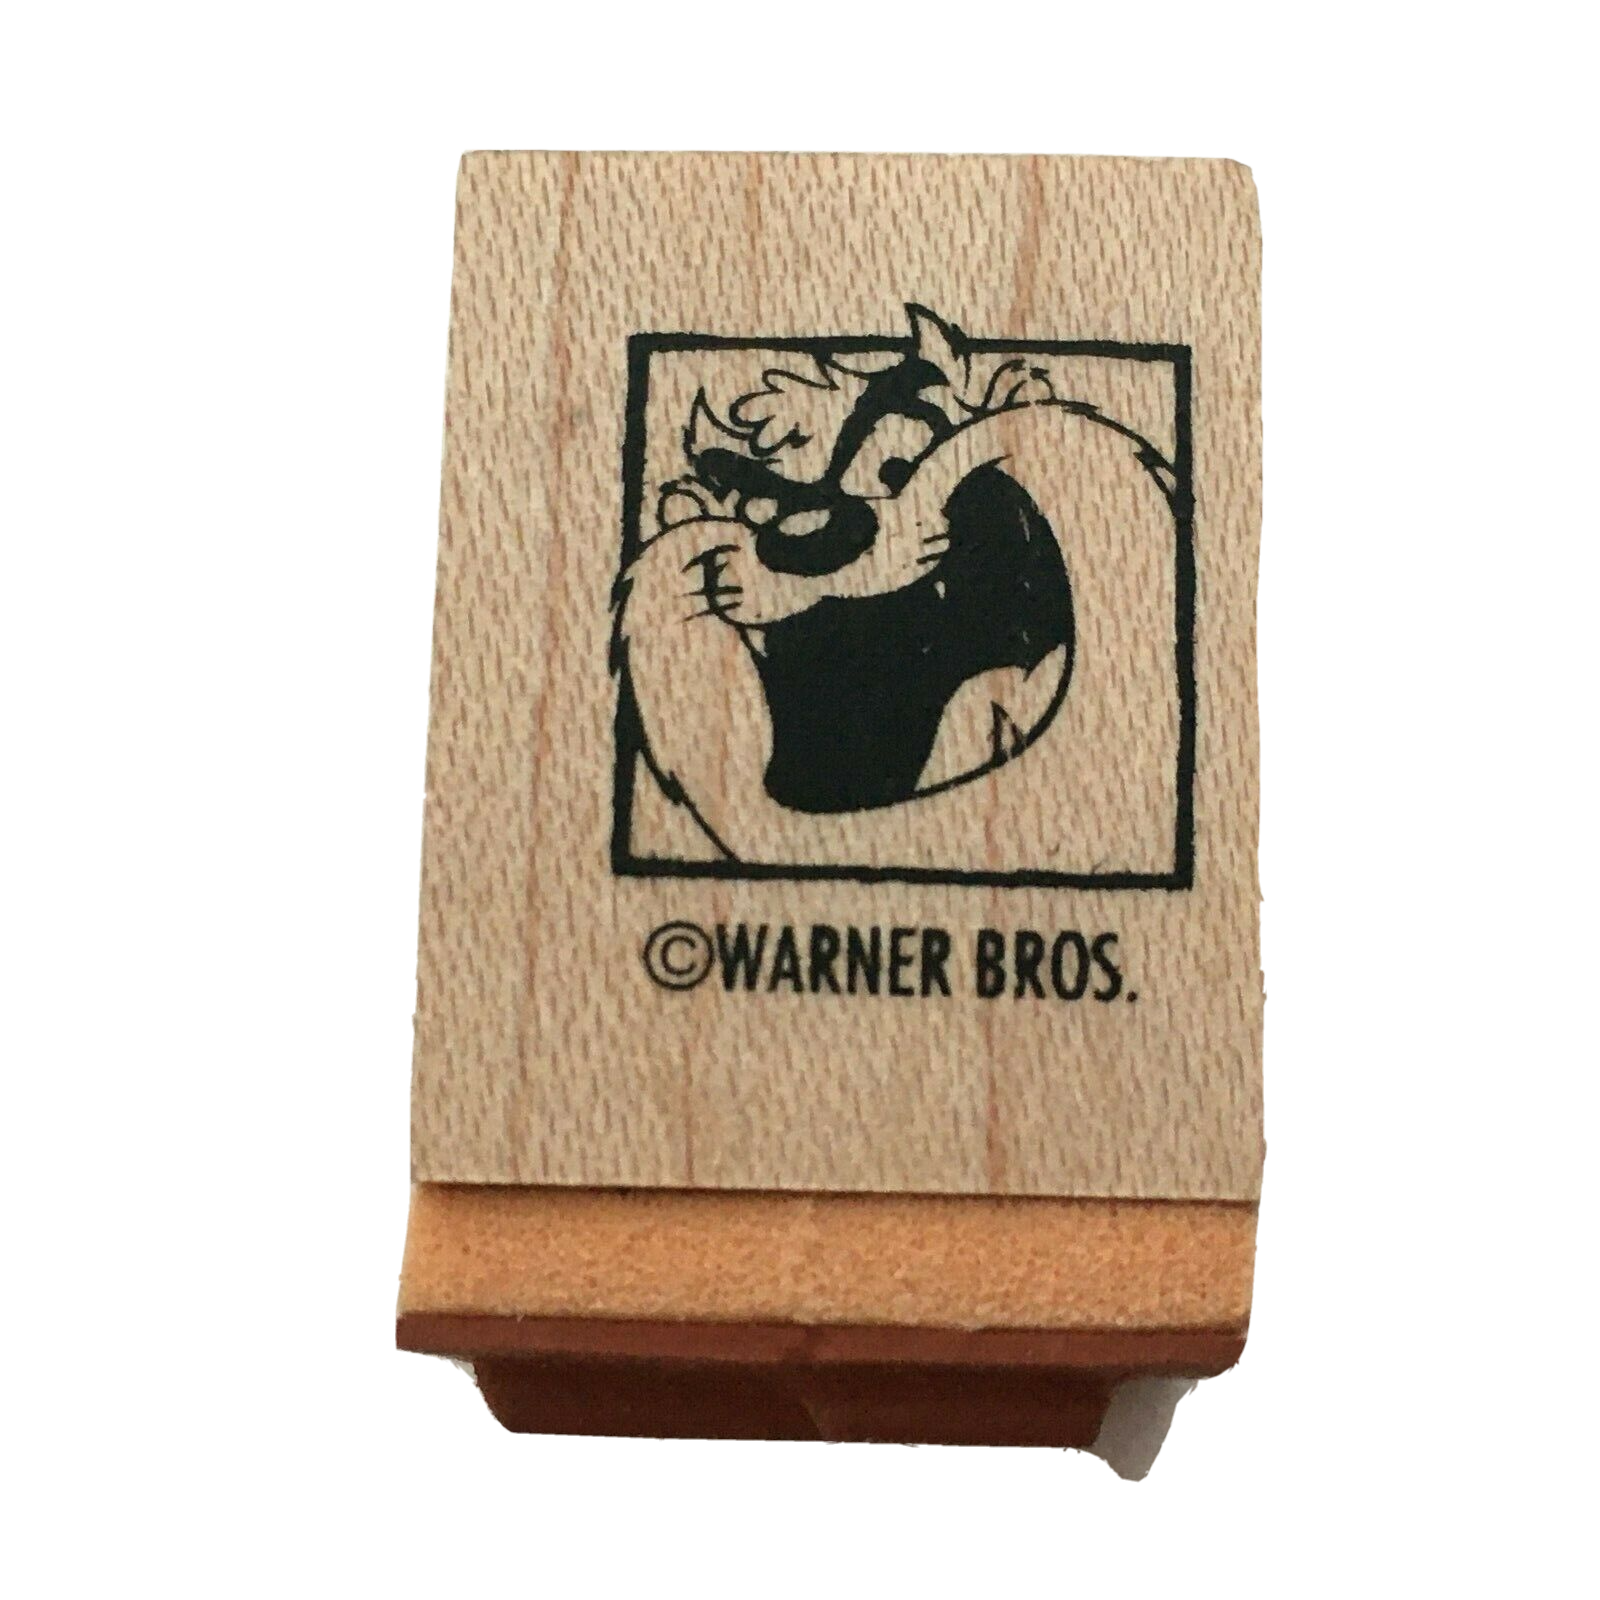 Looney Tunes Tasmanian Devil Character Rubber Stamp Tiny Card Making Craft Art - $4.99